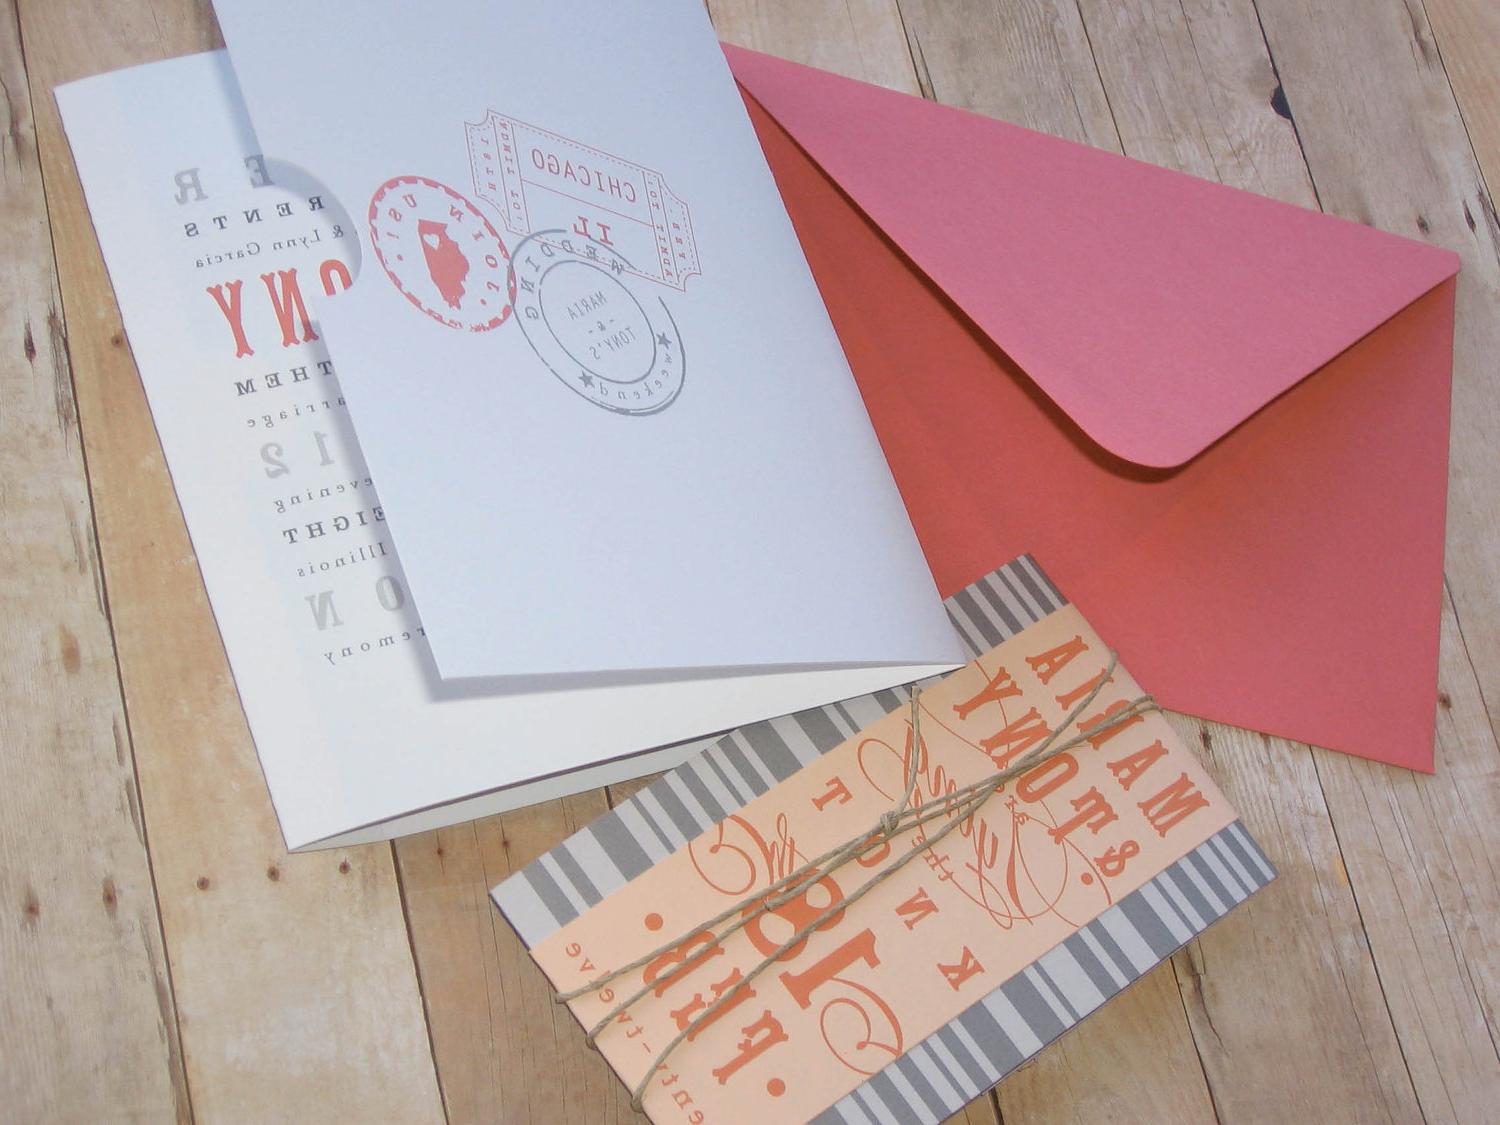 Travel Chic - Folded Wedding Invitation. From LetterBoxInk